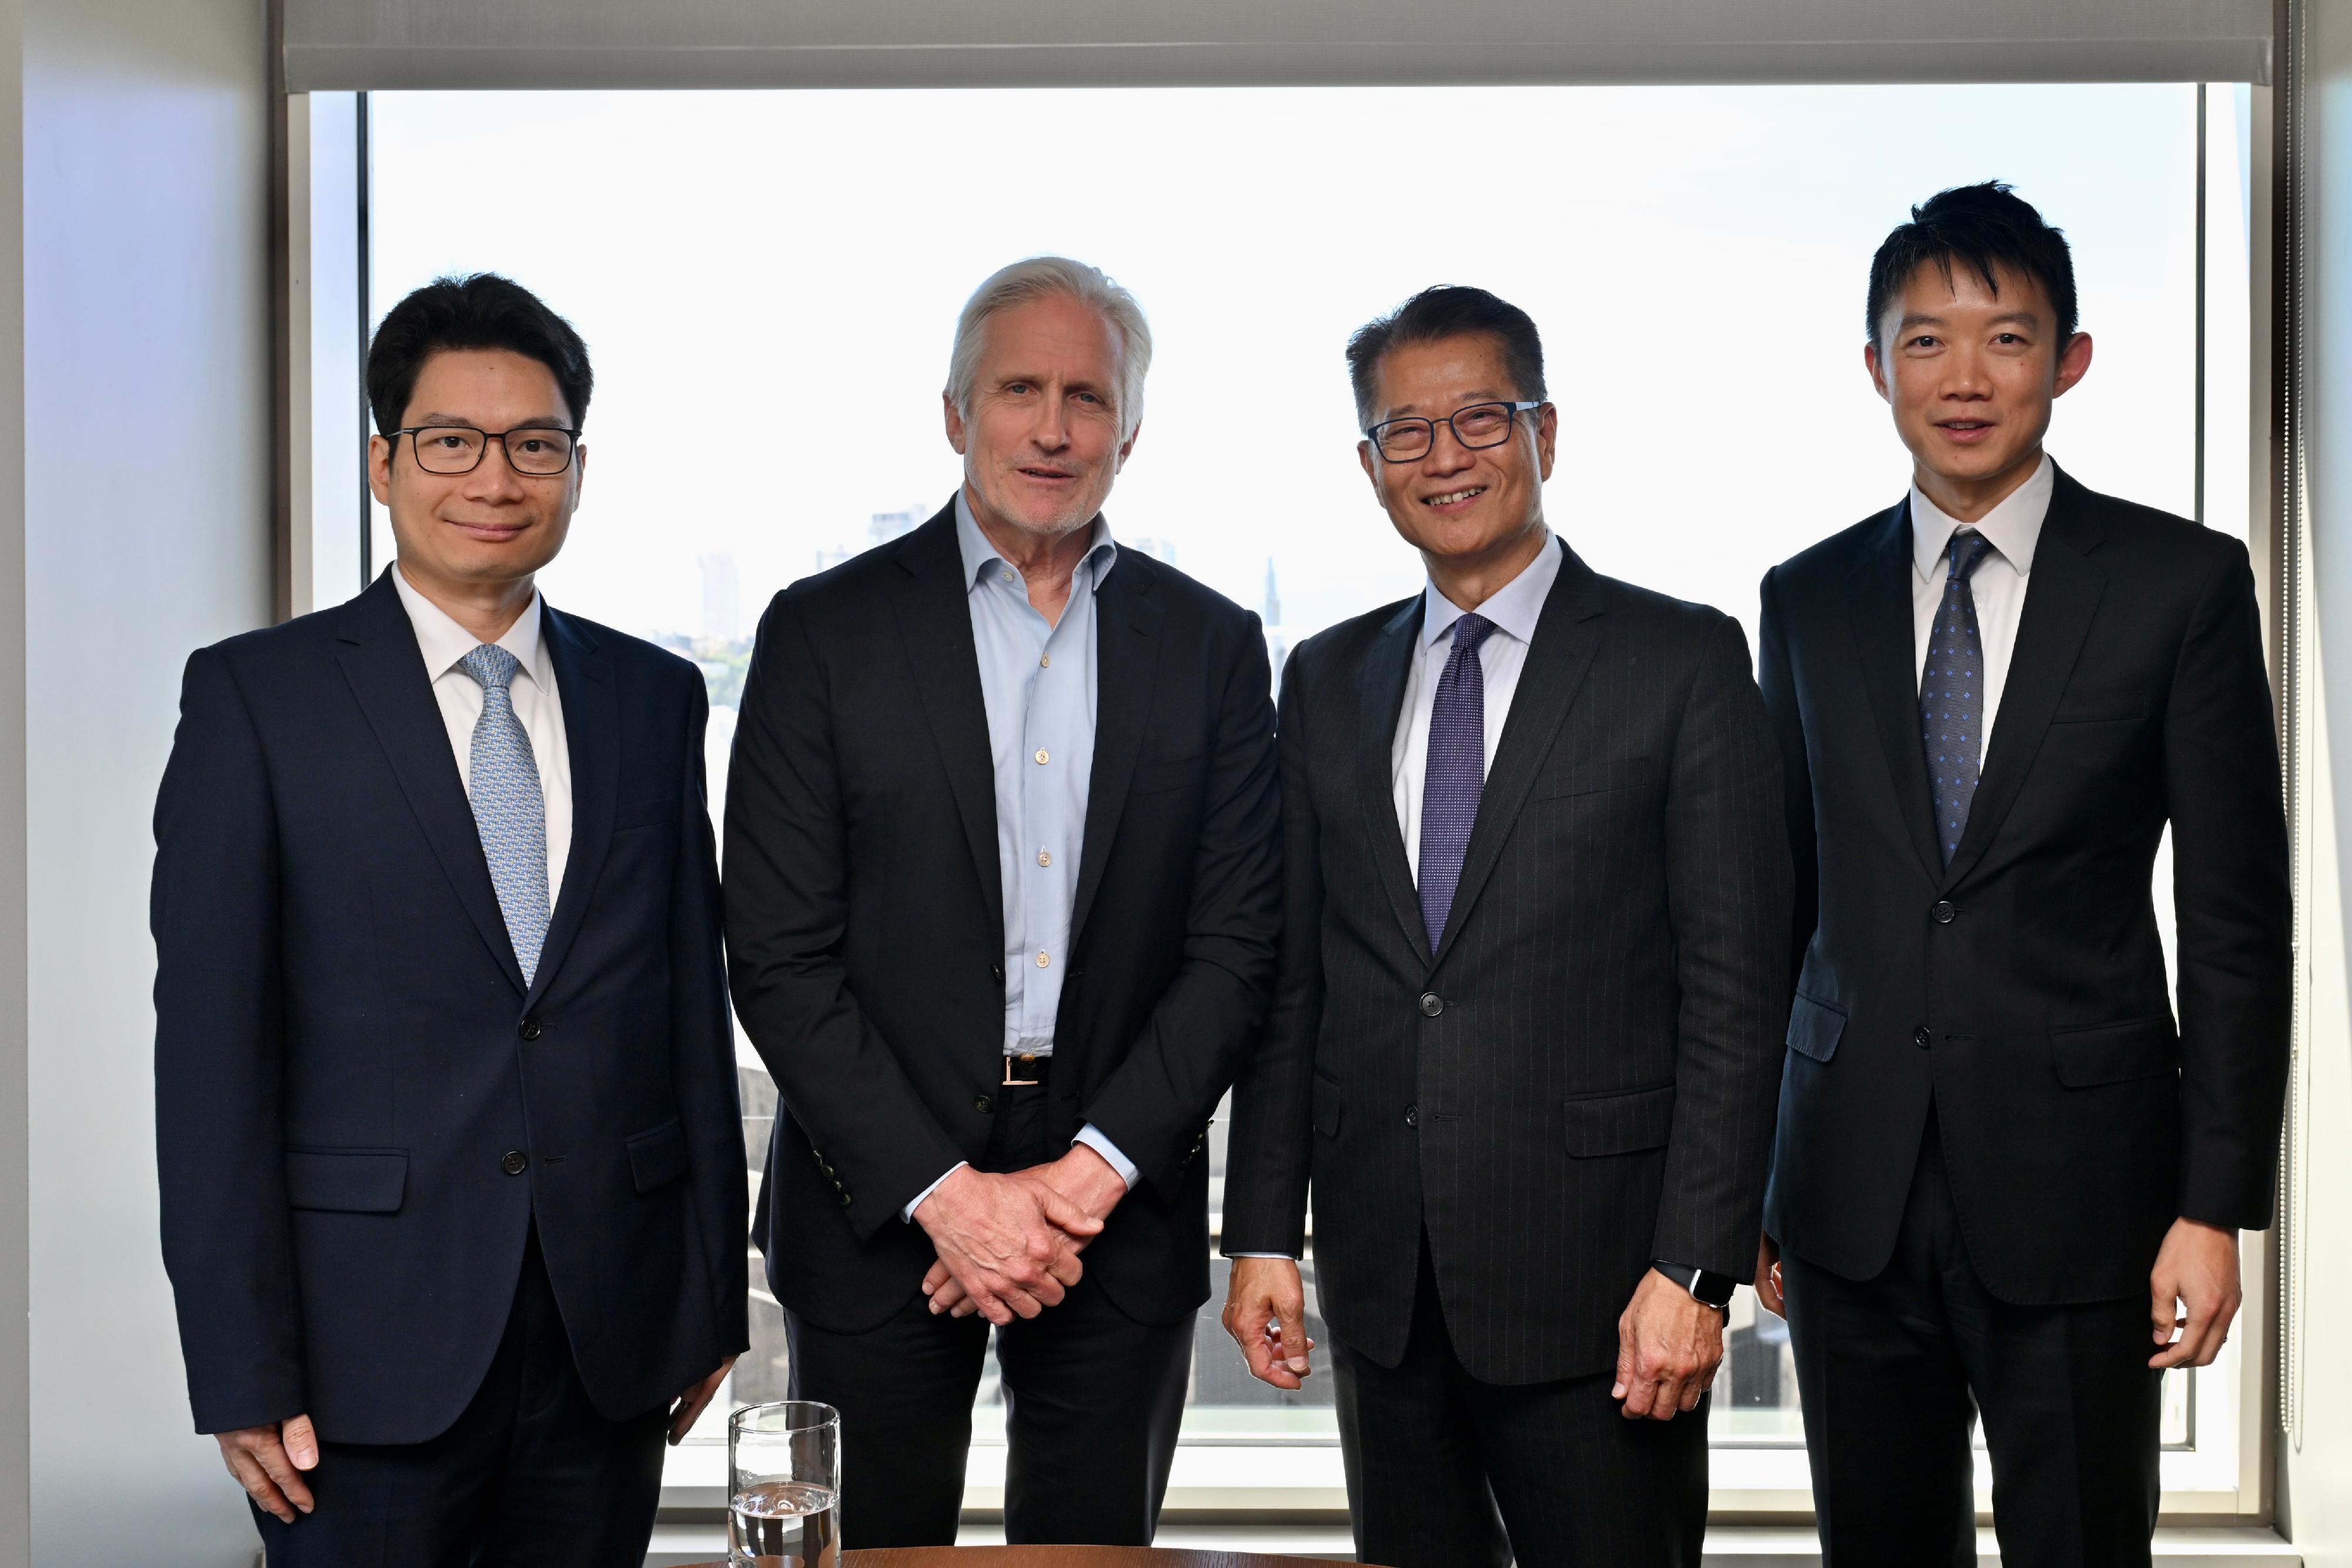 The Financial Secretary, Mr Paul Chan, began his visit to the United States on May 28 (San Francisco time), and visited an alternative asset management company, TPG, to meet with the Founder and Executive Chairman, Mr Jim Coulter. Photo shows Mr Chan (second right), accompanied by the Under Secretary for Financial Services and the Treasury, Mr Joseph Chan (first left) and Executive Director of the Hong Kong Monetary Authority Mr Kenneth Hui (first right) and Mr Coulter (second left).